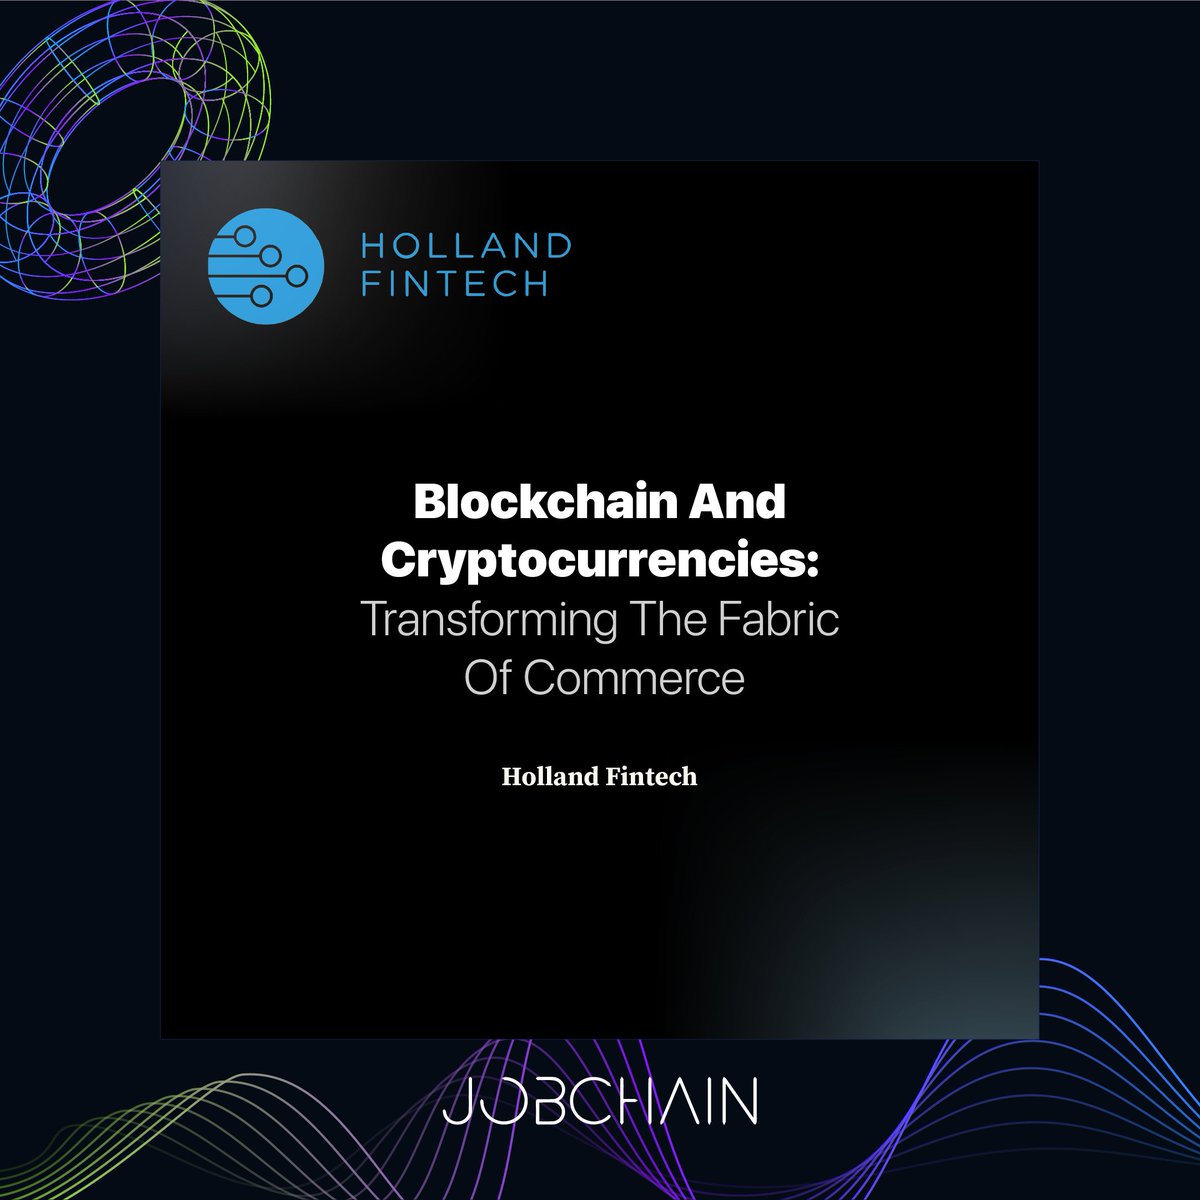 'At @HollandFintech, we are privileged to partner with entities like Jobchain who are carving innovative paths in the digital finance landscape.' 🤝💙